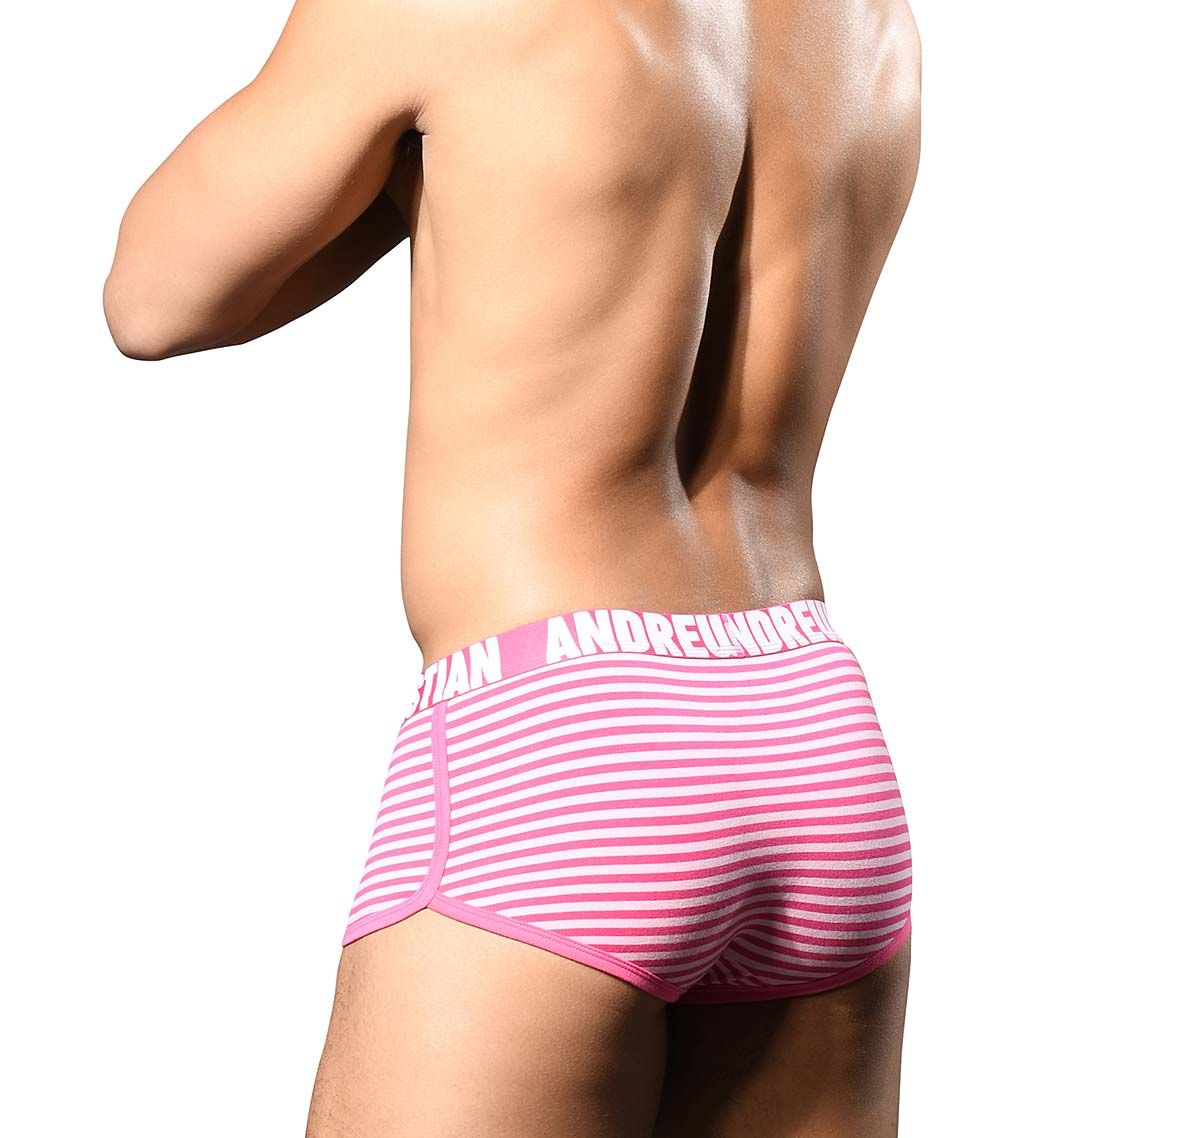 Andrew Christian Boxers ULTRA PINK STRIPE BOXER w/ ALMOST NAKED 93075, pink